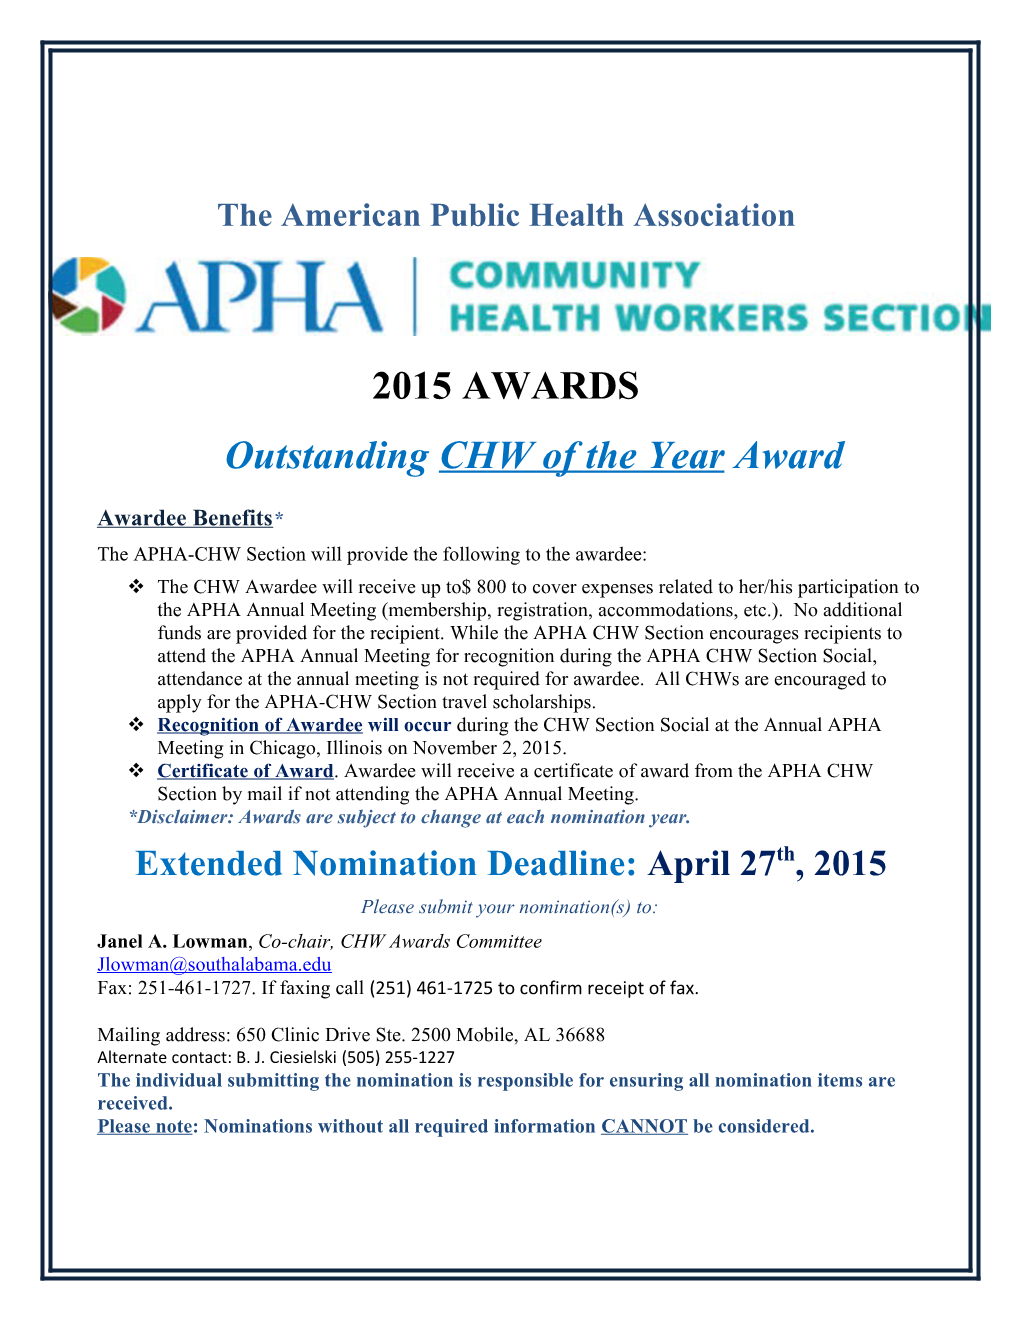 Outstanding CHW of the Year Award